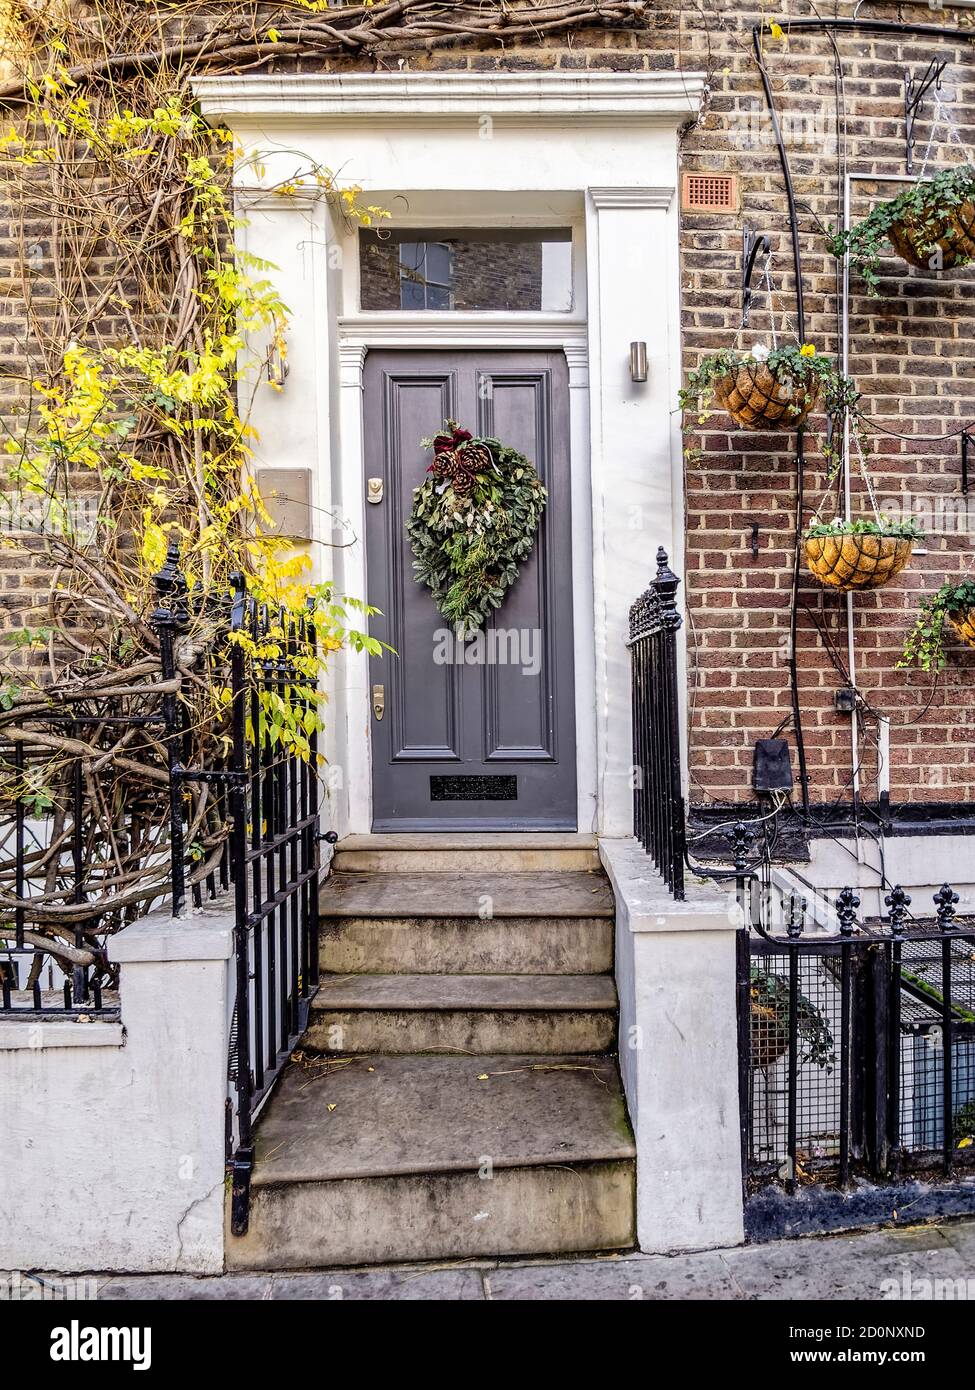 British Christmas. A classic Notting Hill house door with festive decorations in London, United Kingdom. Stock Photo